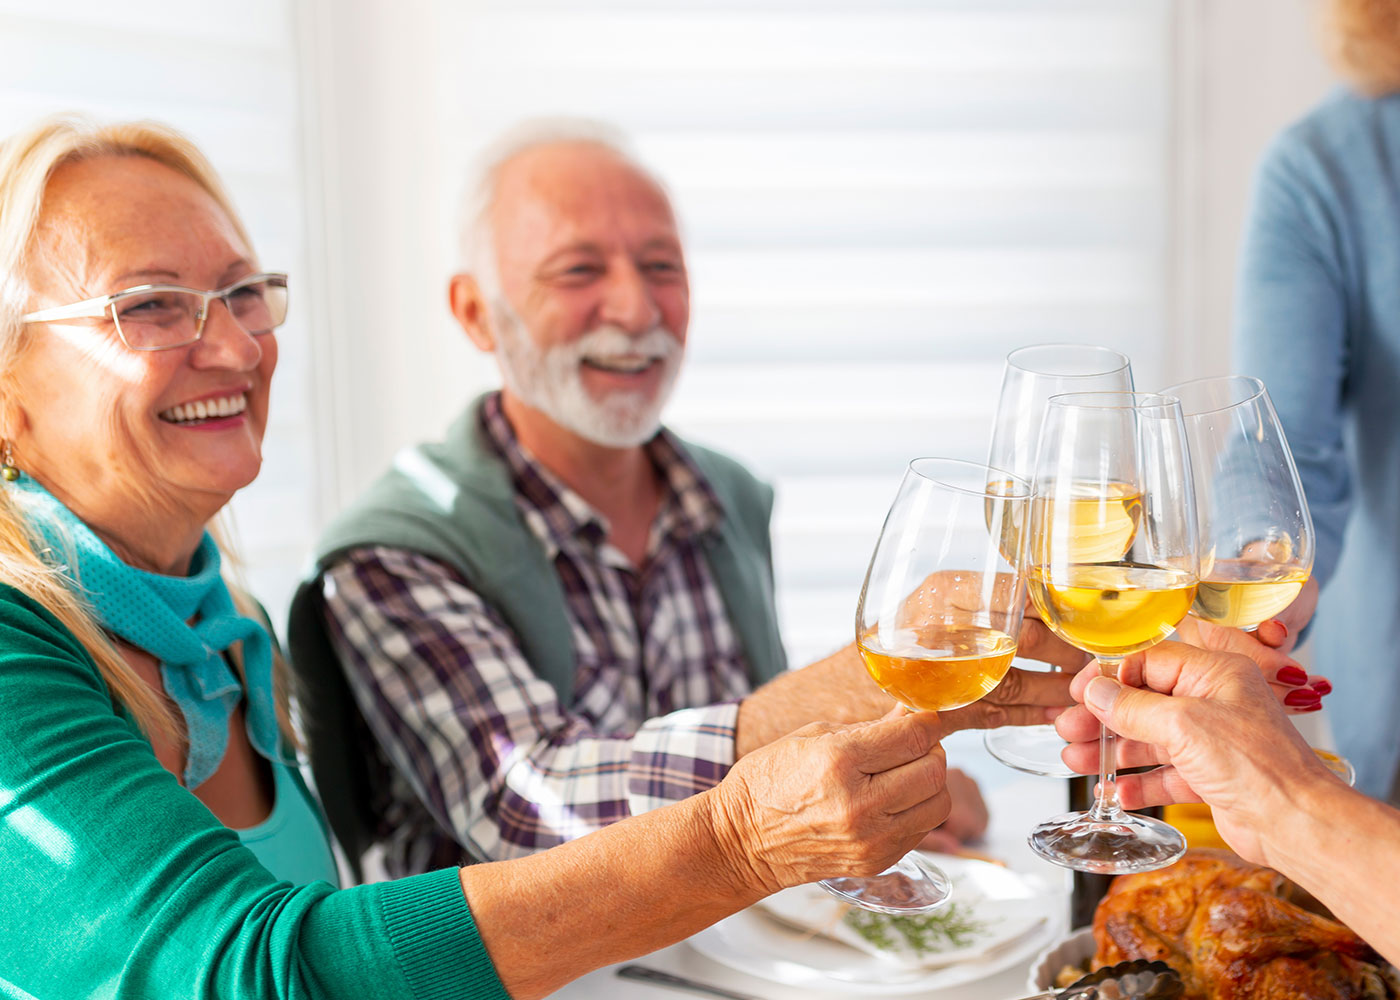 Group of older adults clinking wine glasses